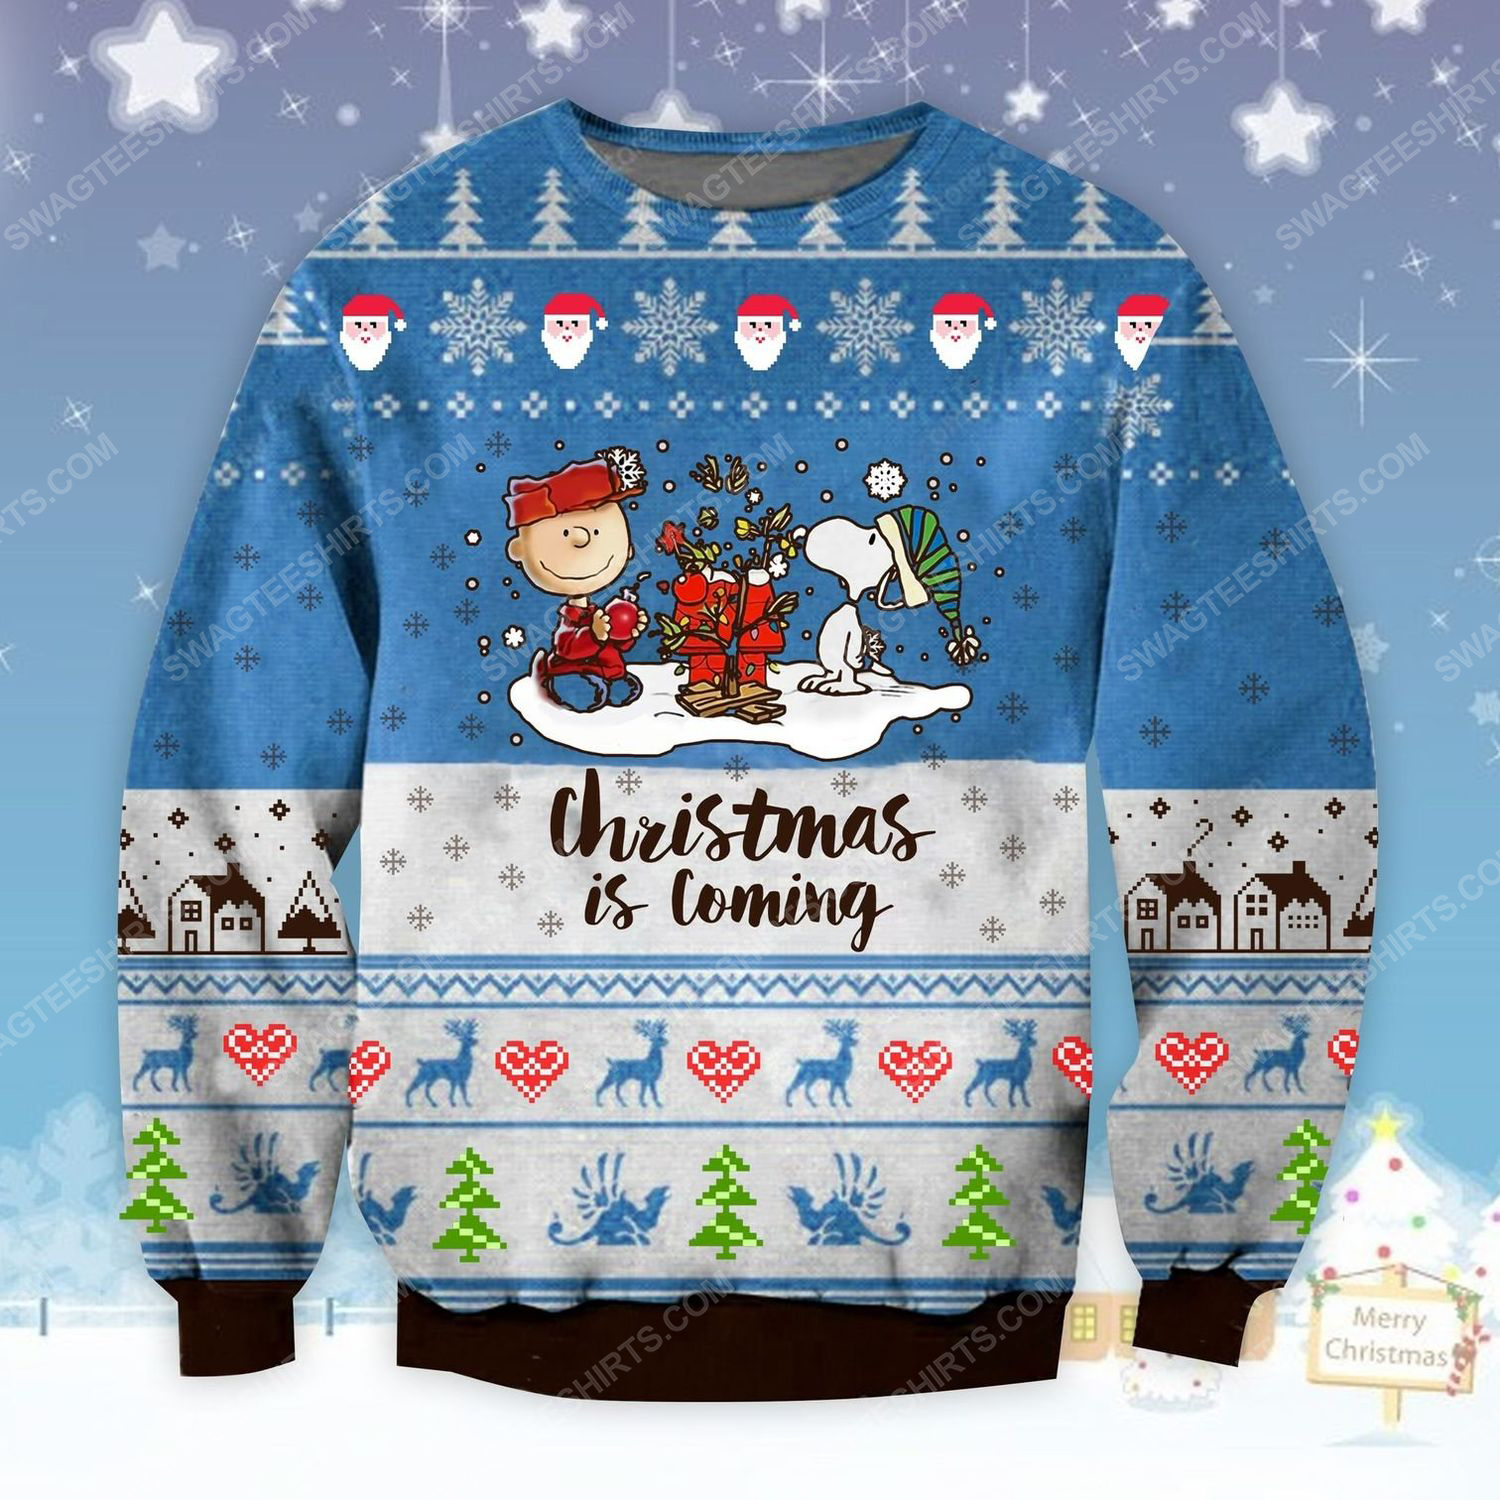 Charlie brown and snoopy christmas is coming ugly christmas sweater